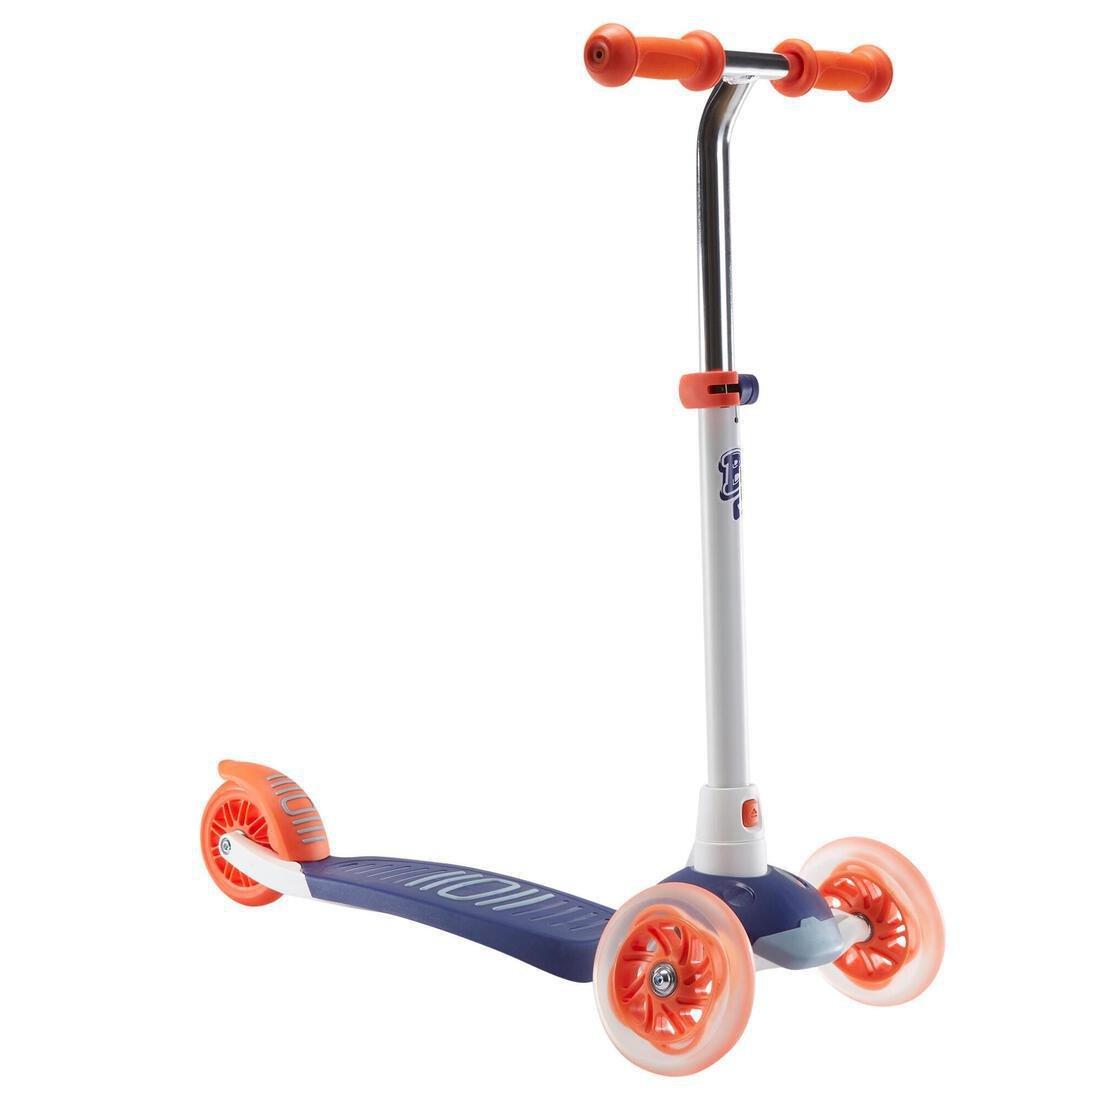 OXELO - B1 500 Kids' Scooter, White